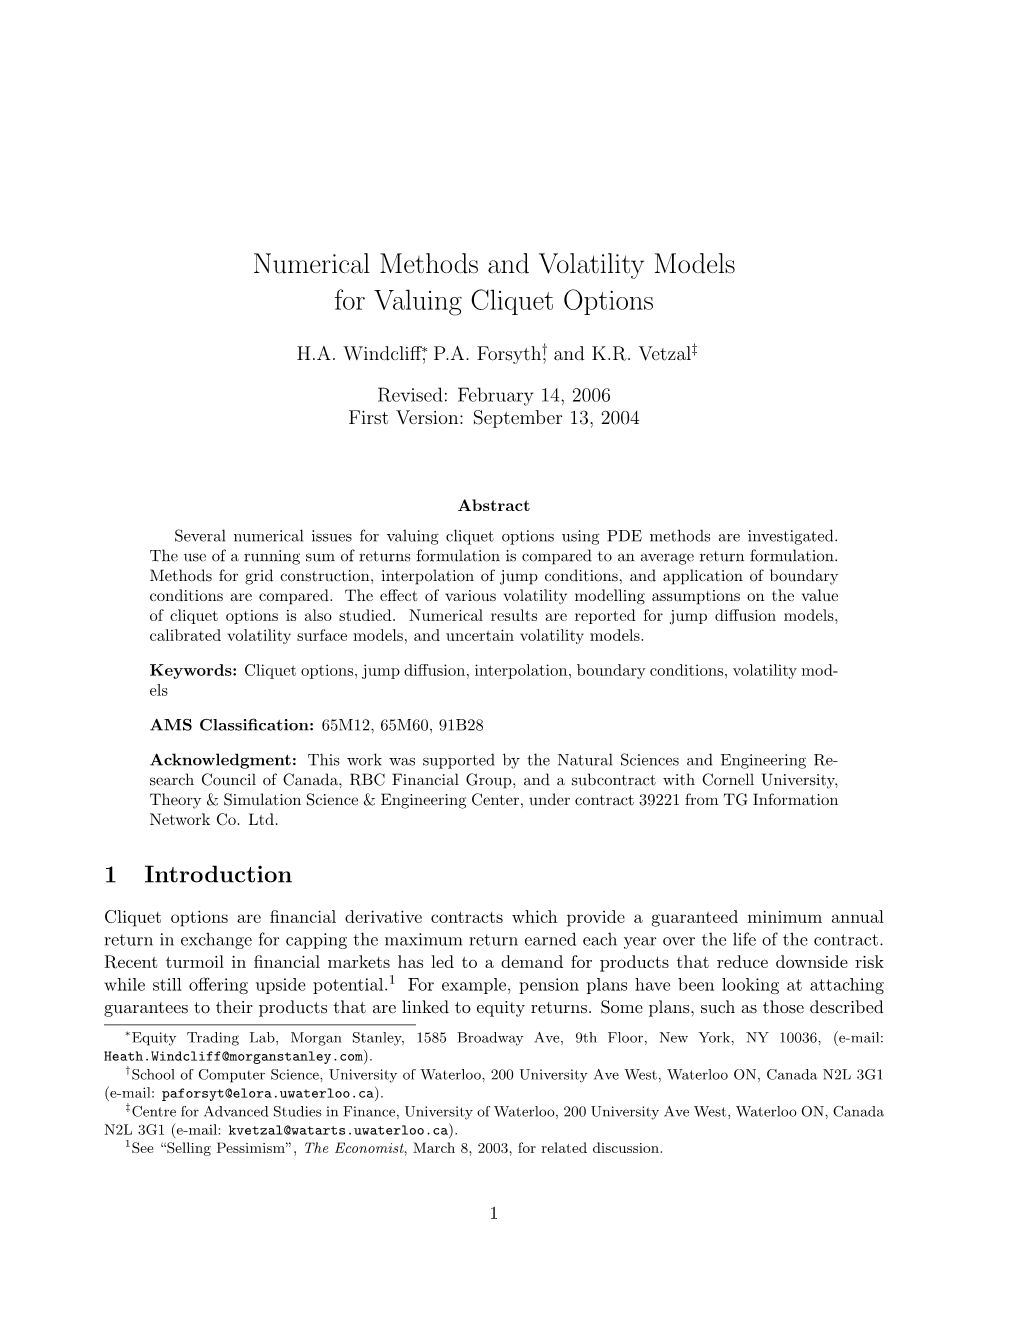 Numerical Methods and Volatility Models for Valuing Cliquet Options